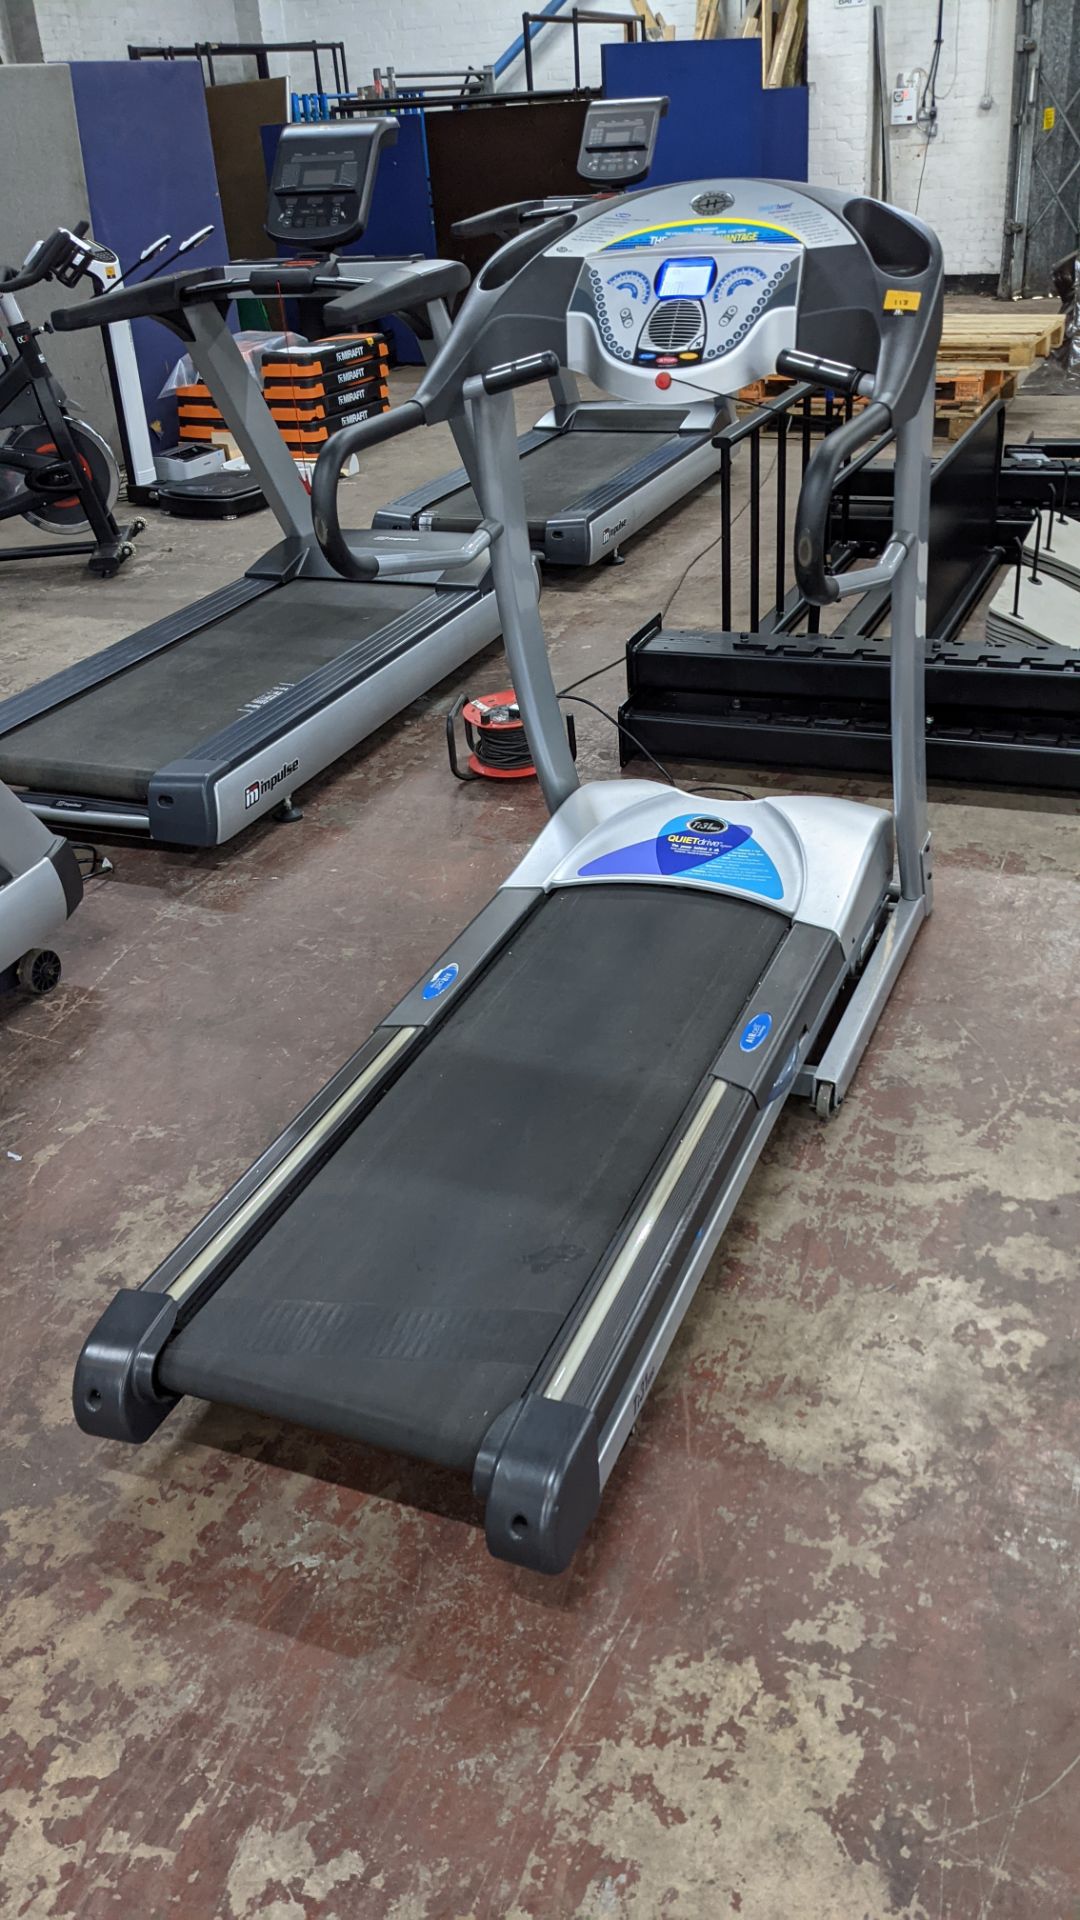 Horizon Fitness Ti31 HRC Treadmill - folds up for easy storage